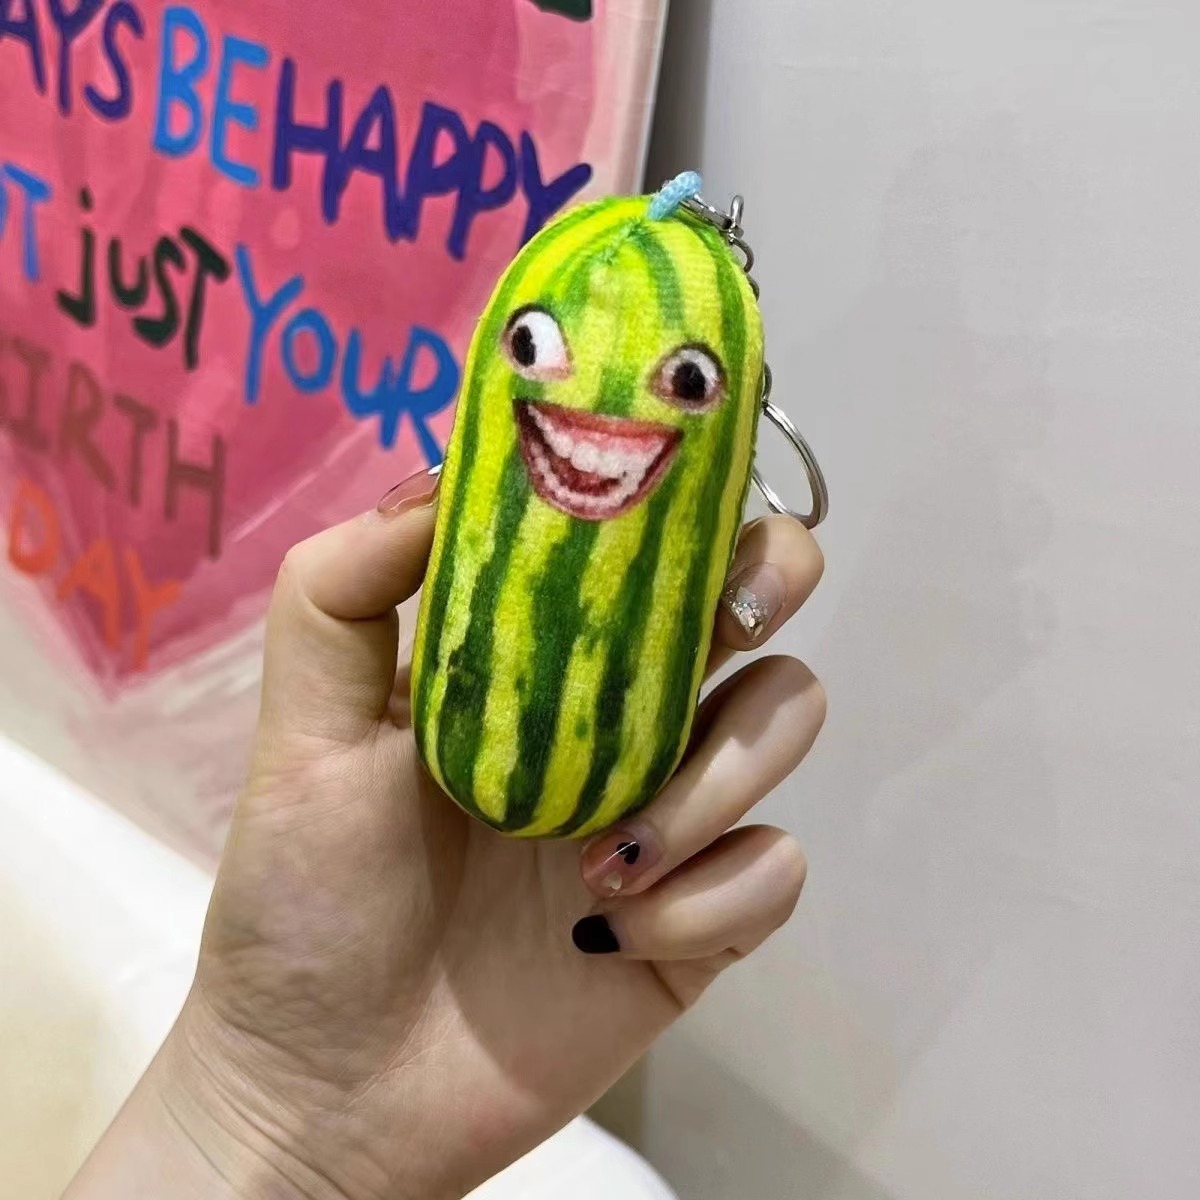 Who Knows Watermelon Strip Family? Voice Funny Stuffed Toy Pendant Press Talking Original Voice Laughing